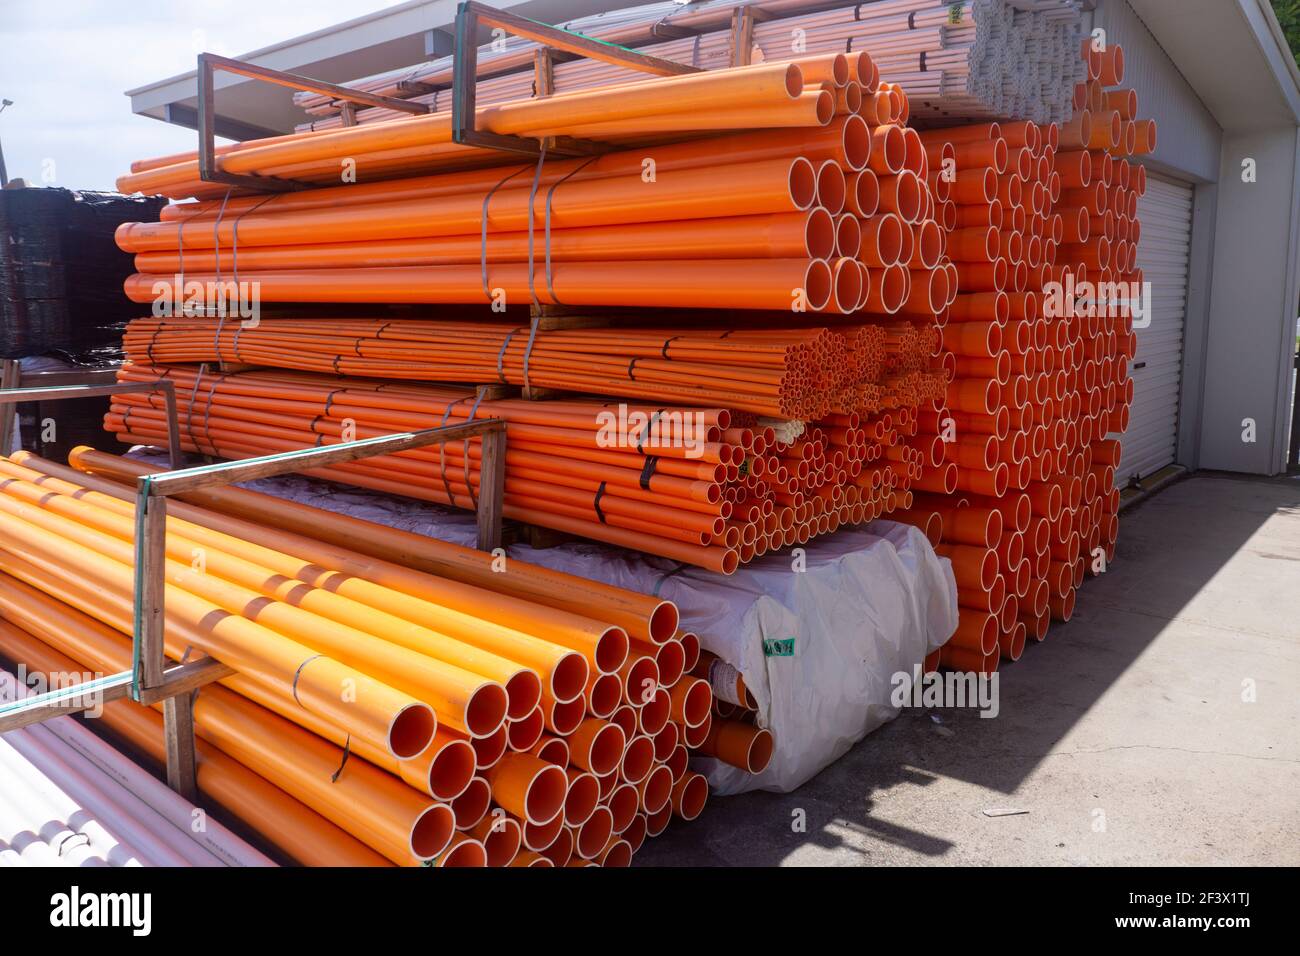 Stacks of orange, yellow and white PVC electrical conduit pipes at a warehouse yard. Stock Photo